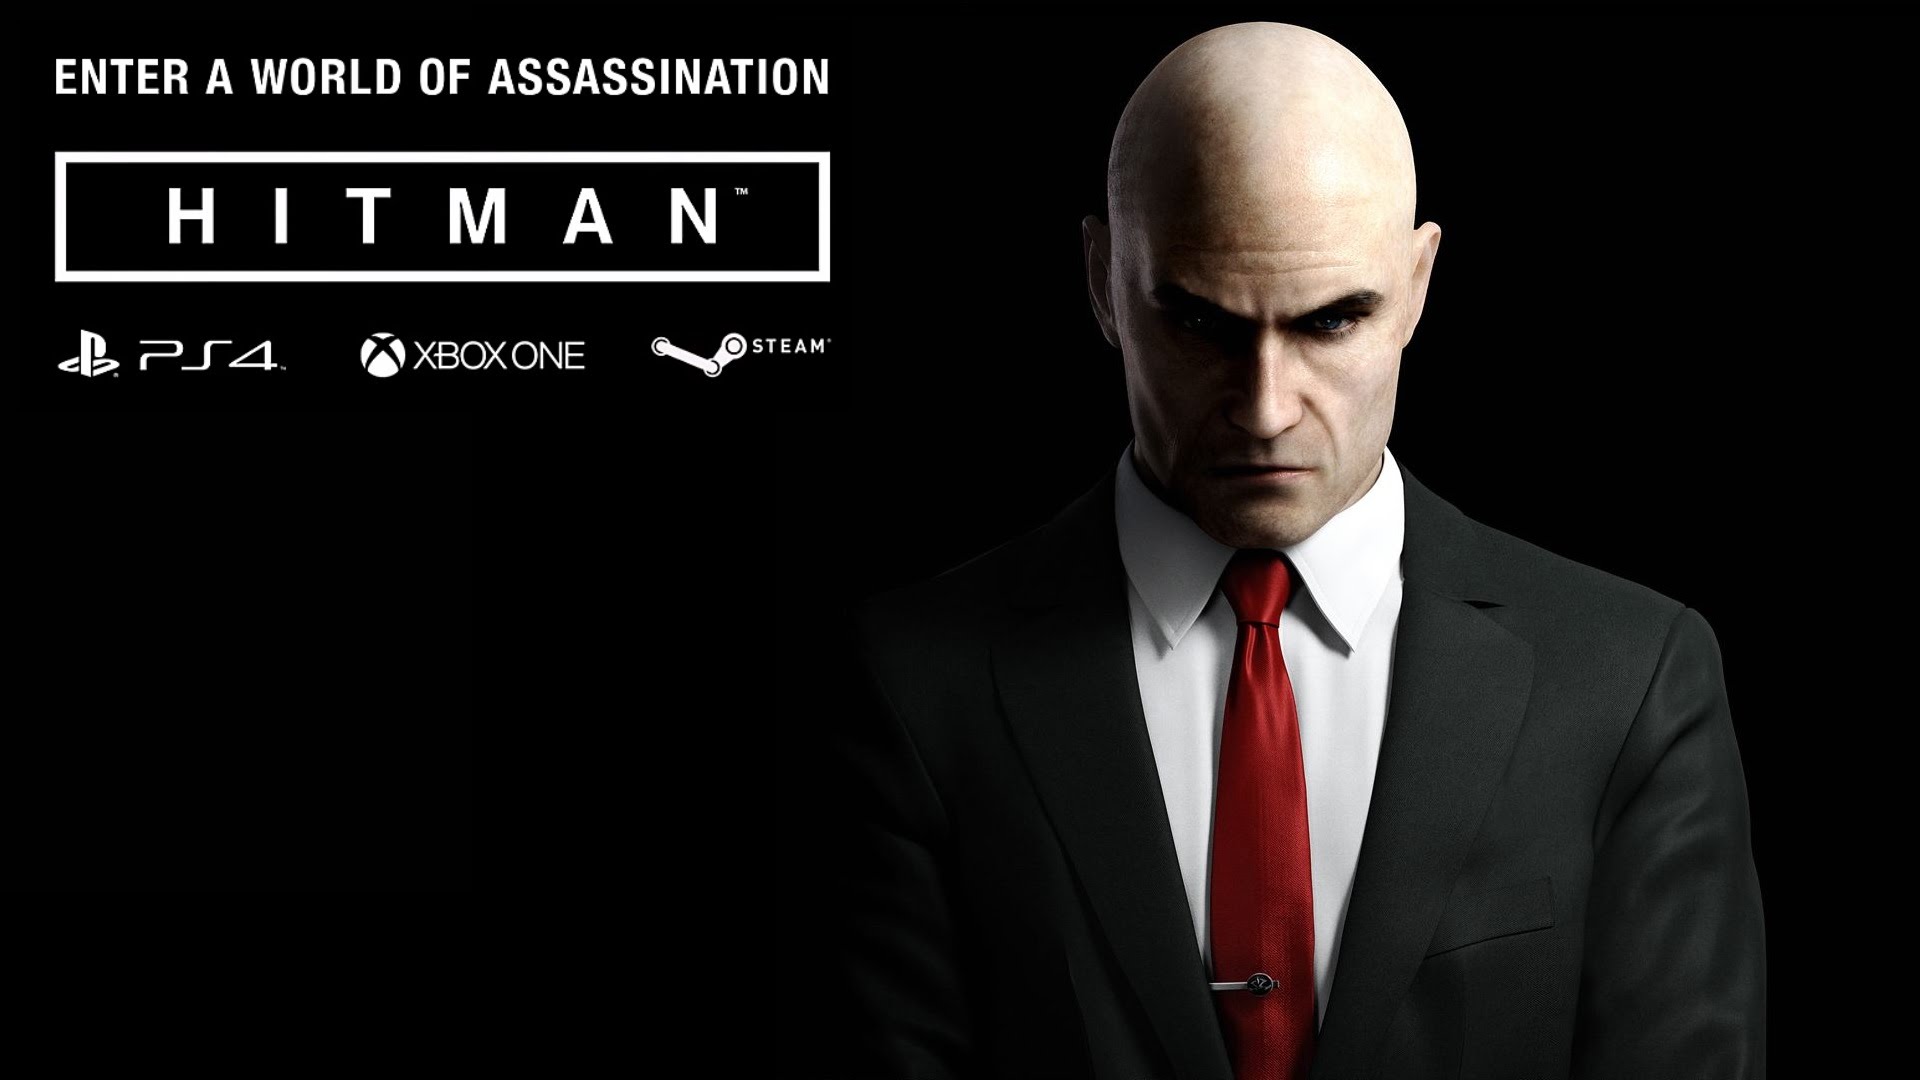 Hitman becomes one of the best PS4 game on the market